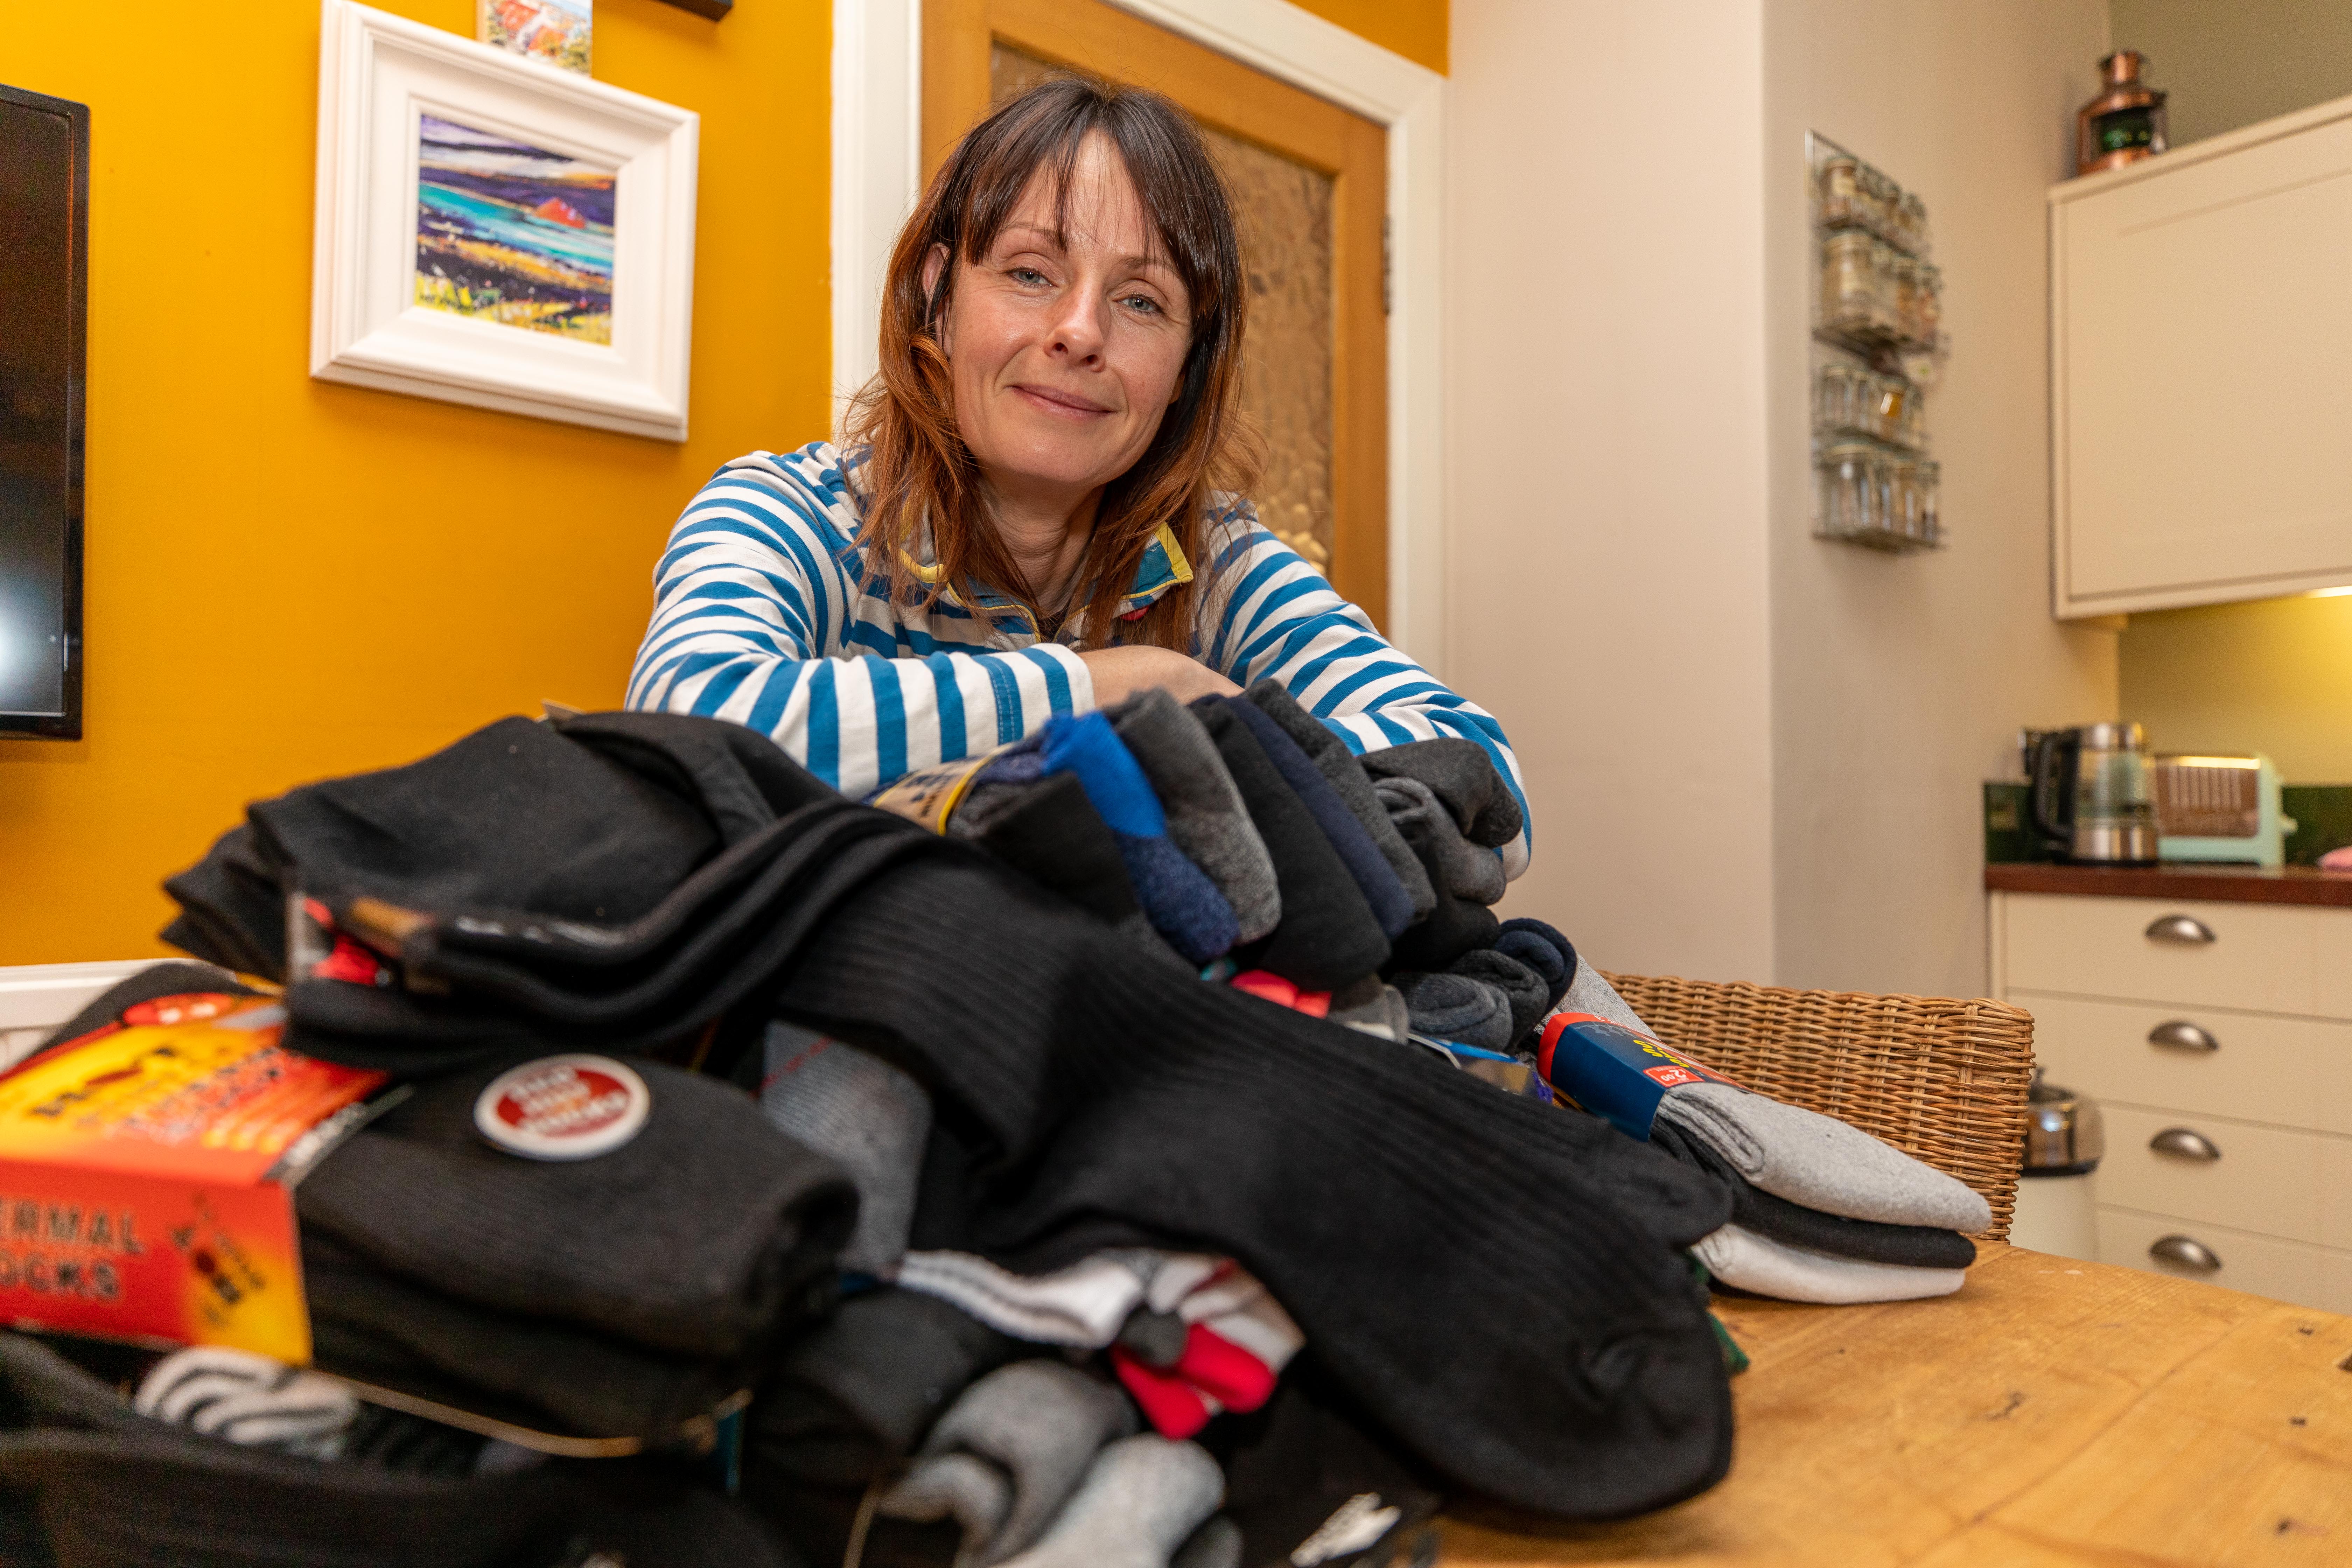 Jennifer Jones, from St Monans, is collecting unwanted Christmas sock gifts for the homeless.